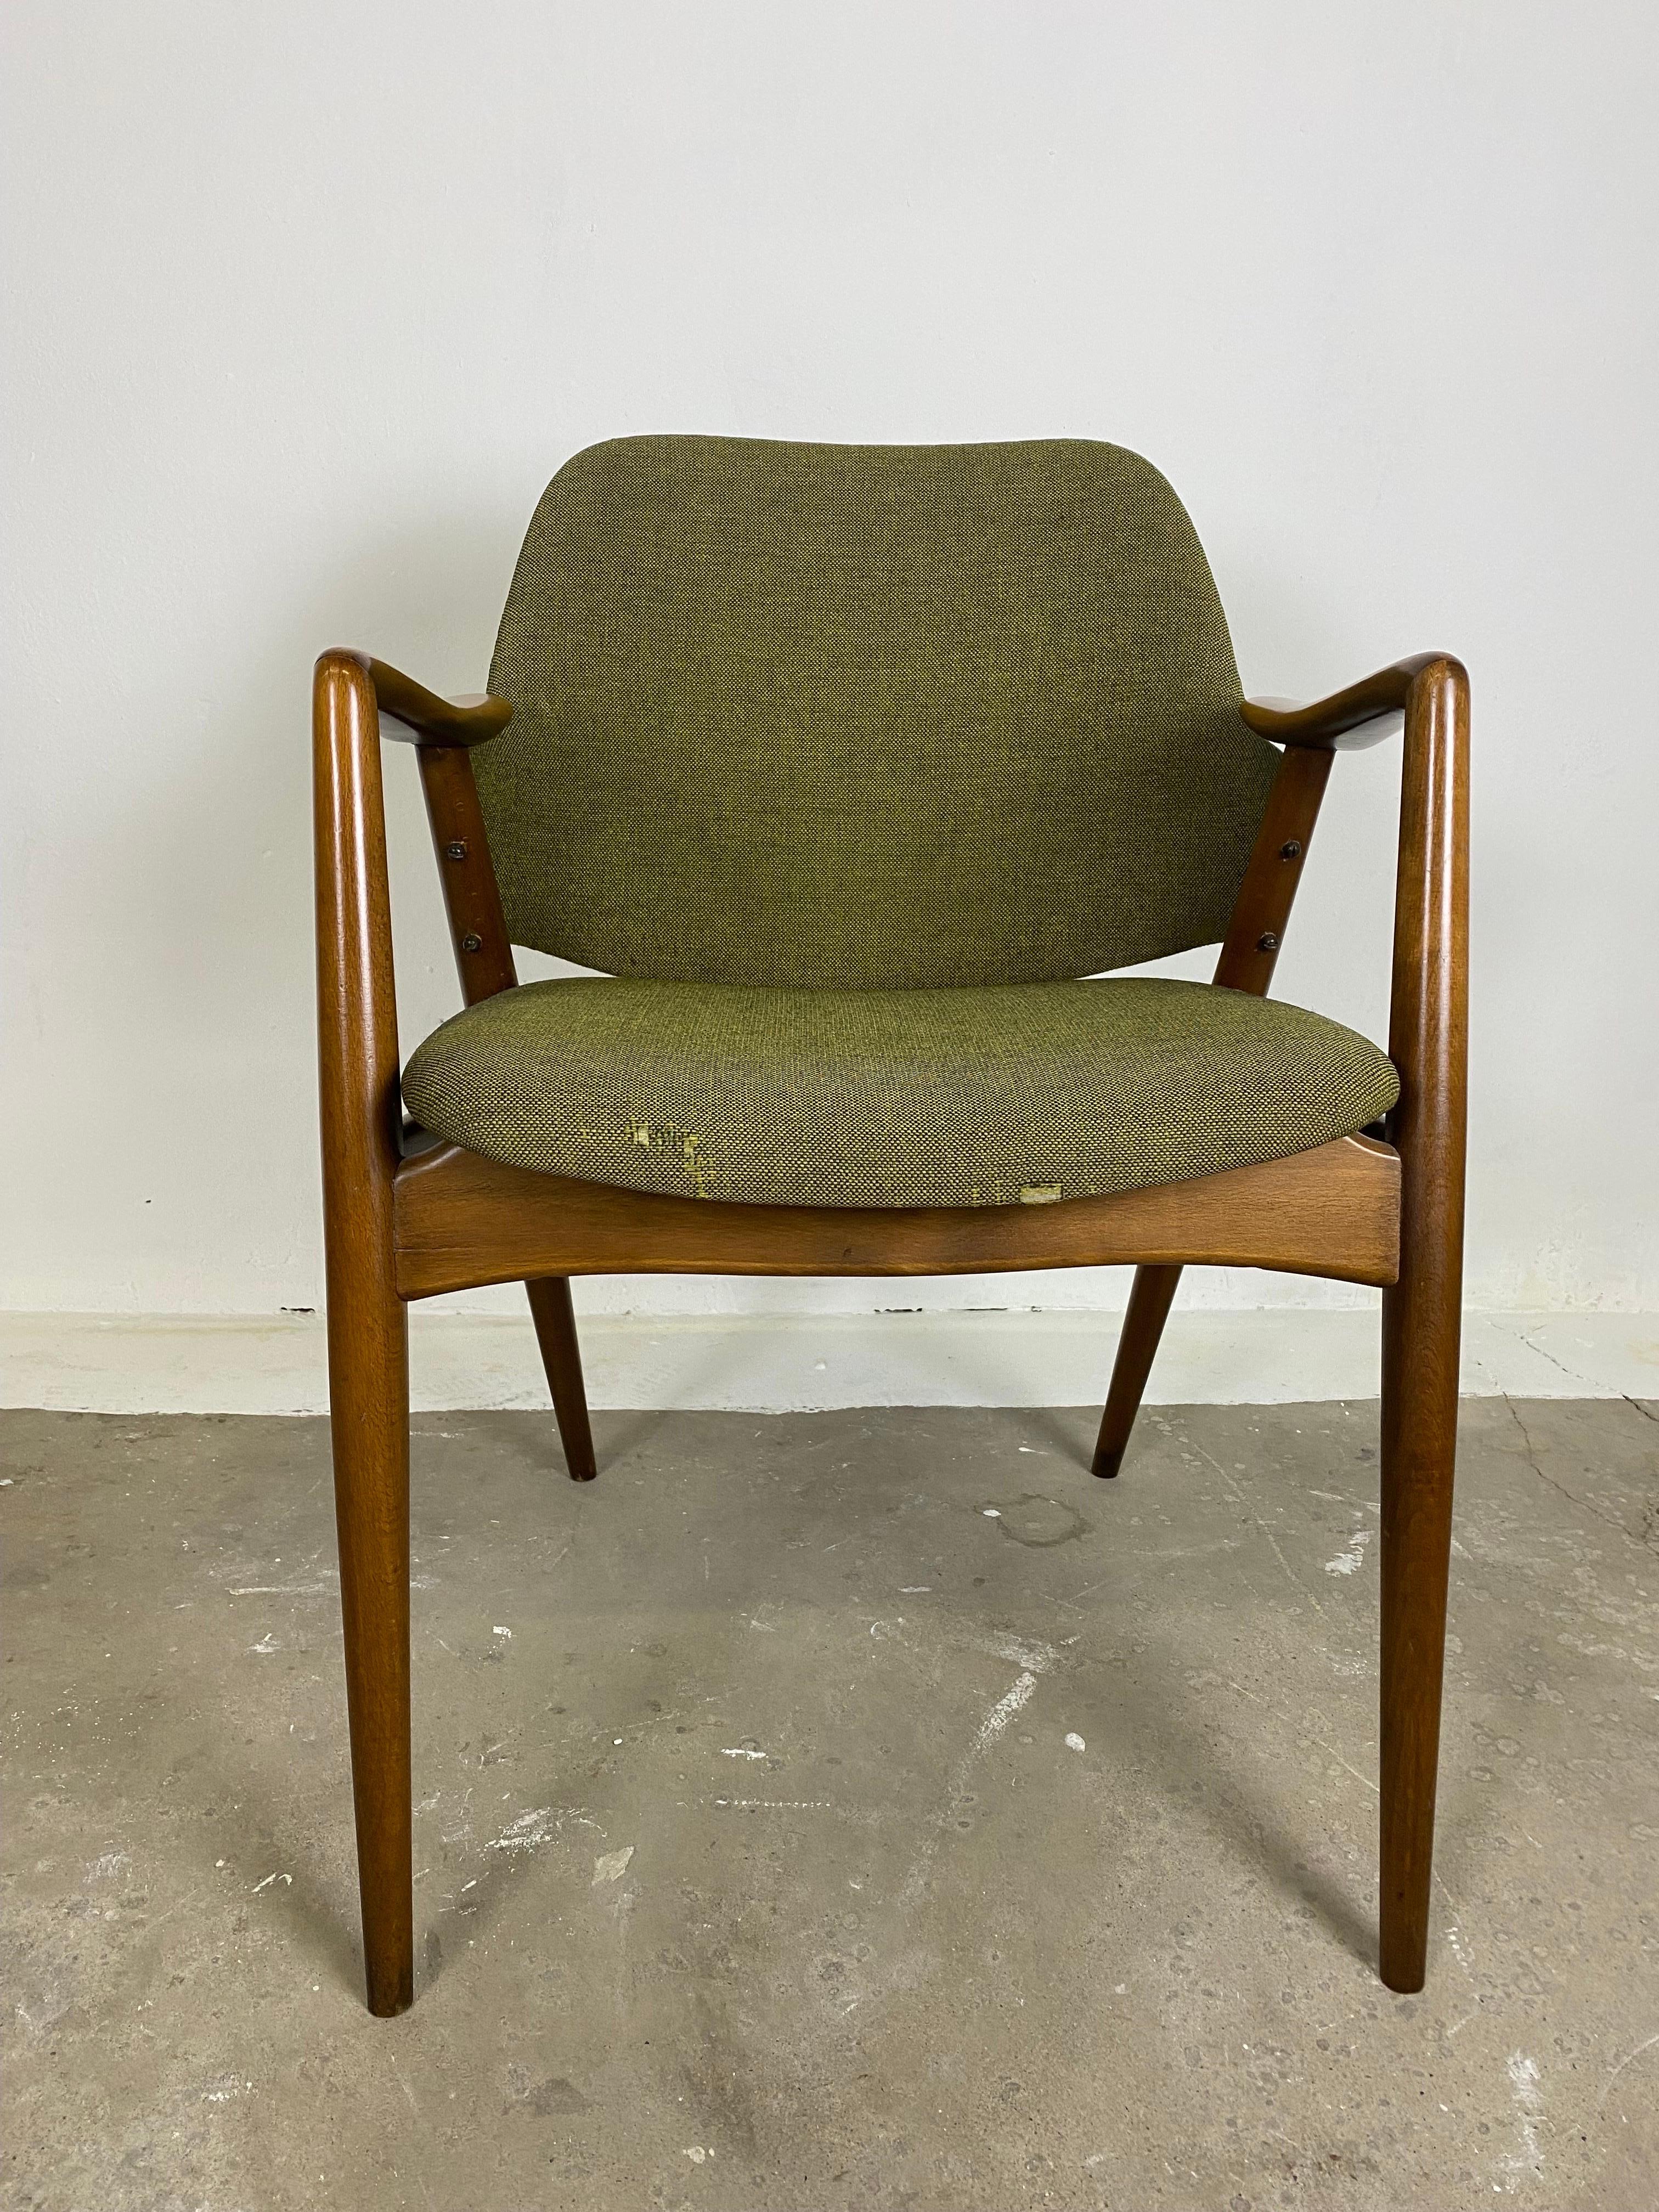 For maybe Reupholstery: A Set of  two Kontur Chairs  by Alf Svensson for Dux of Sweden ,1950s.
Very stabile , comfortable and ergonomic .

These Chairs are in Design and Quality perfectly matching to the famous Kontur Sofa from Alf Svensson for